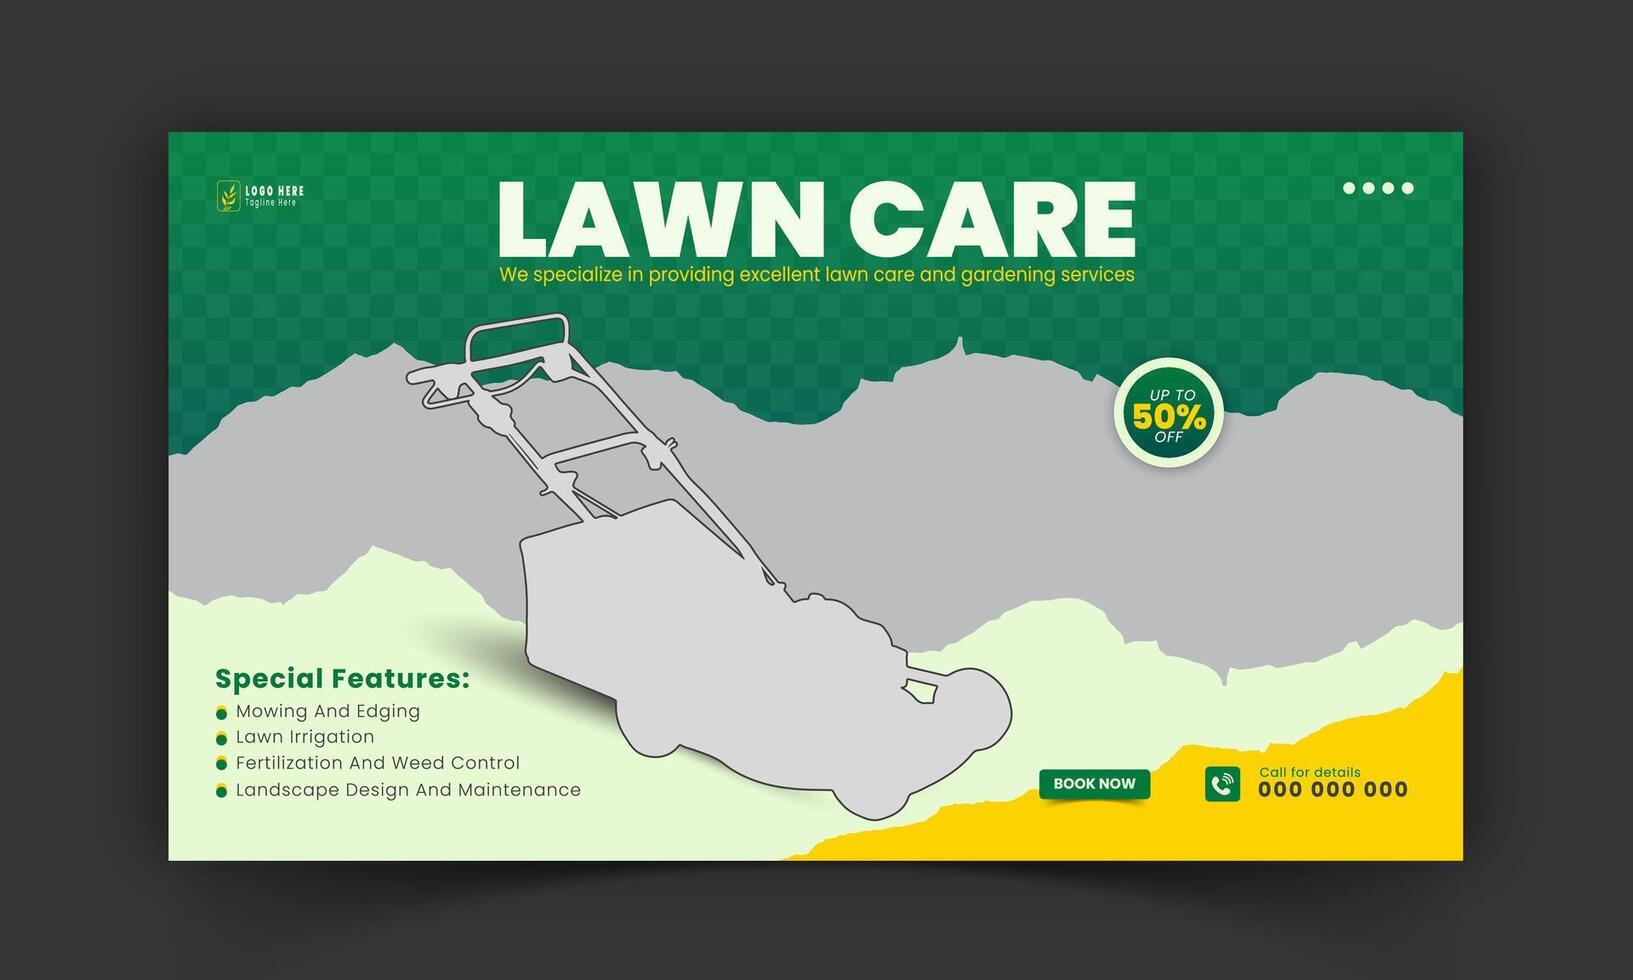 Organic food and agriculture service for stream video thumbnail design, modern lawn mower garden, or landscaping service social media cover or post template with abstract green and yellow color shapes vector